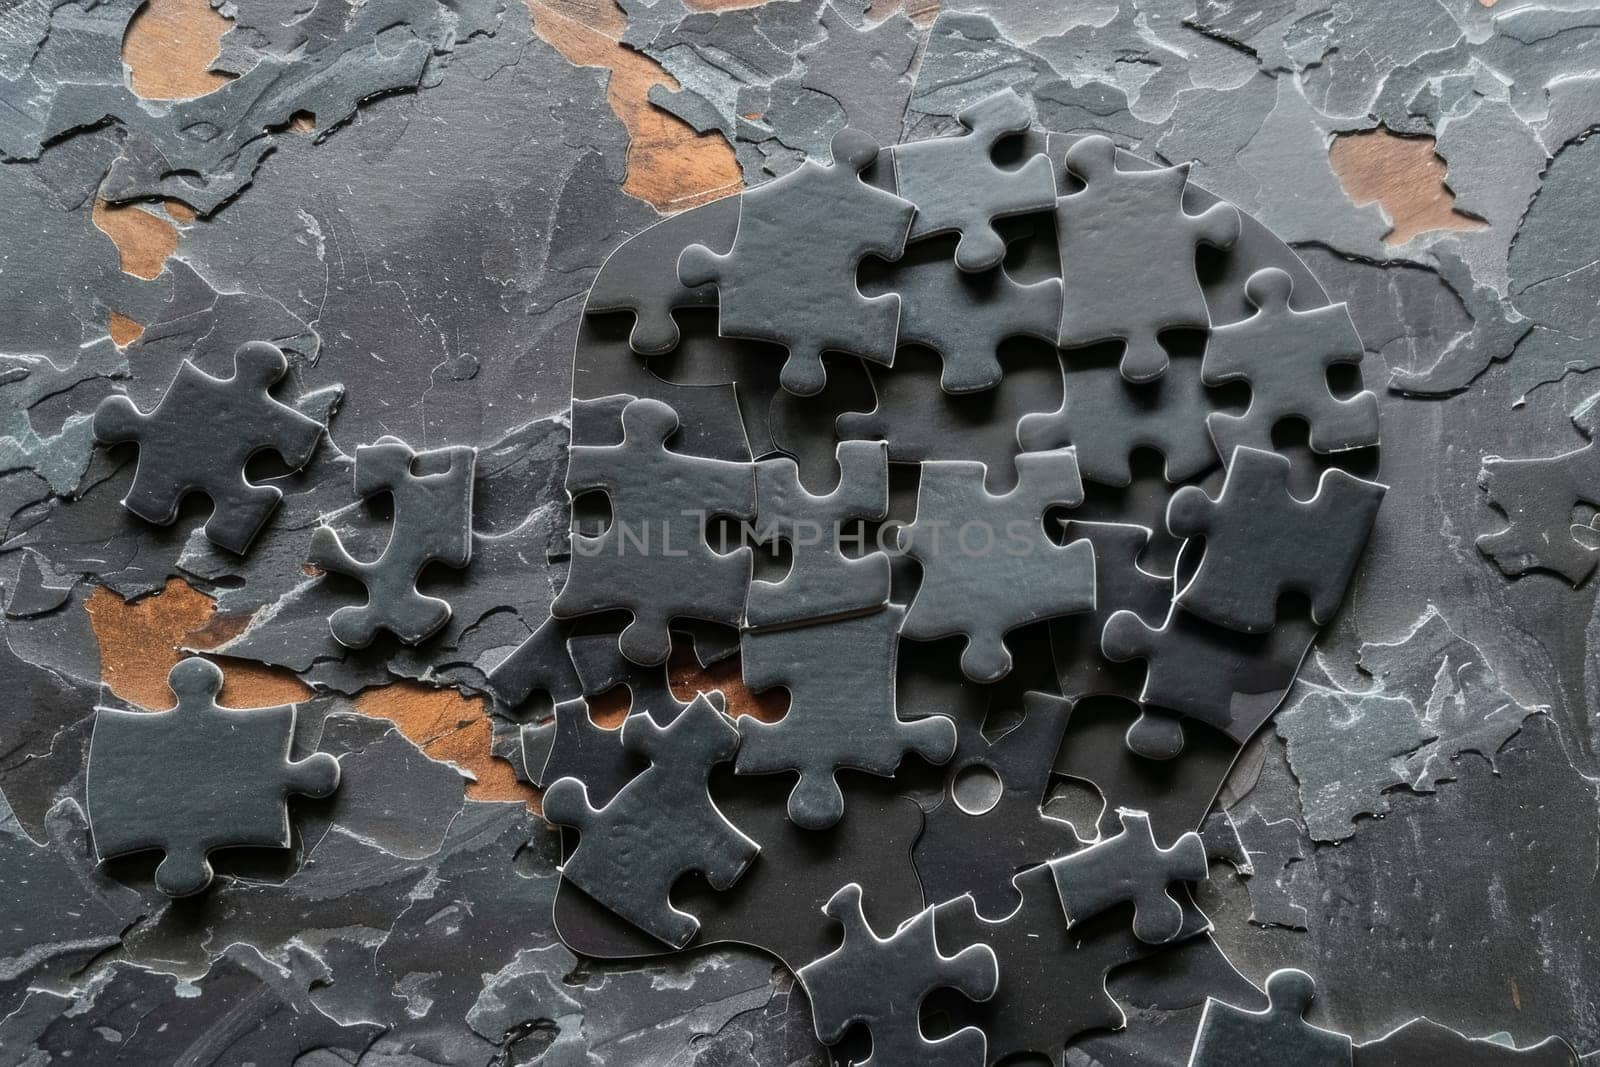 Hand placing a dark jigsaw puzzle piece on a black textured background, signifying complexity and challenge